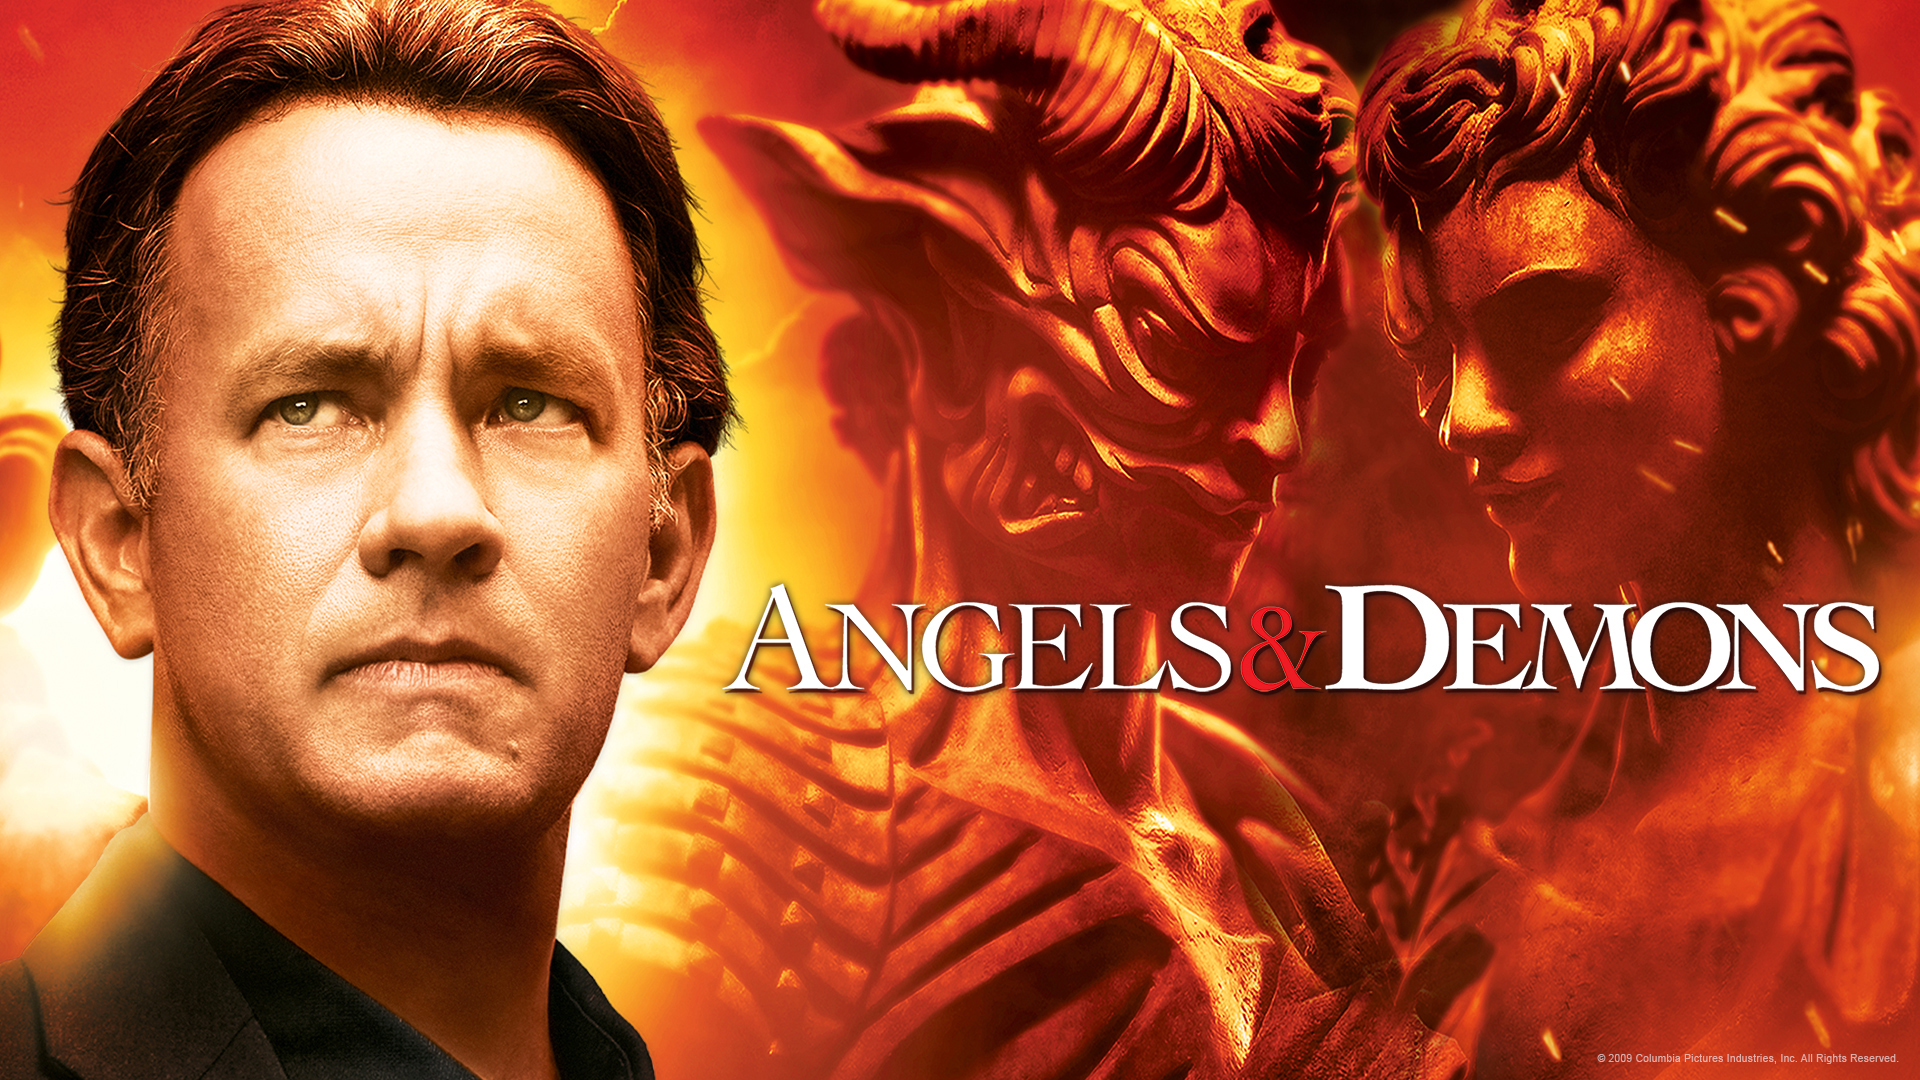 angels and demons movie wallpaper